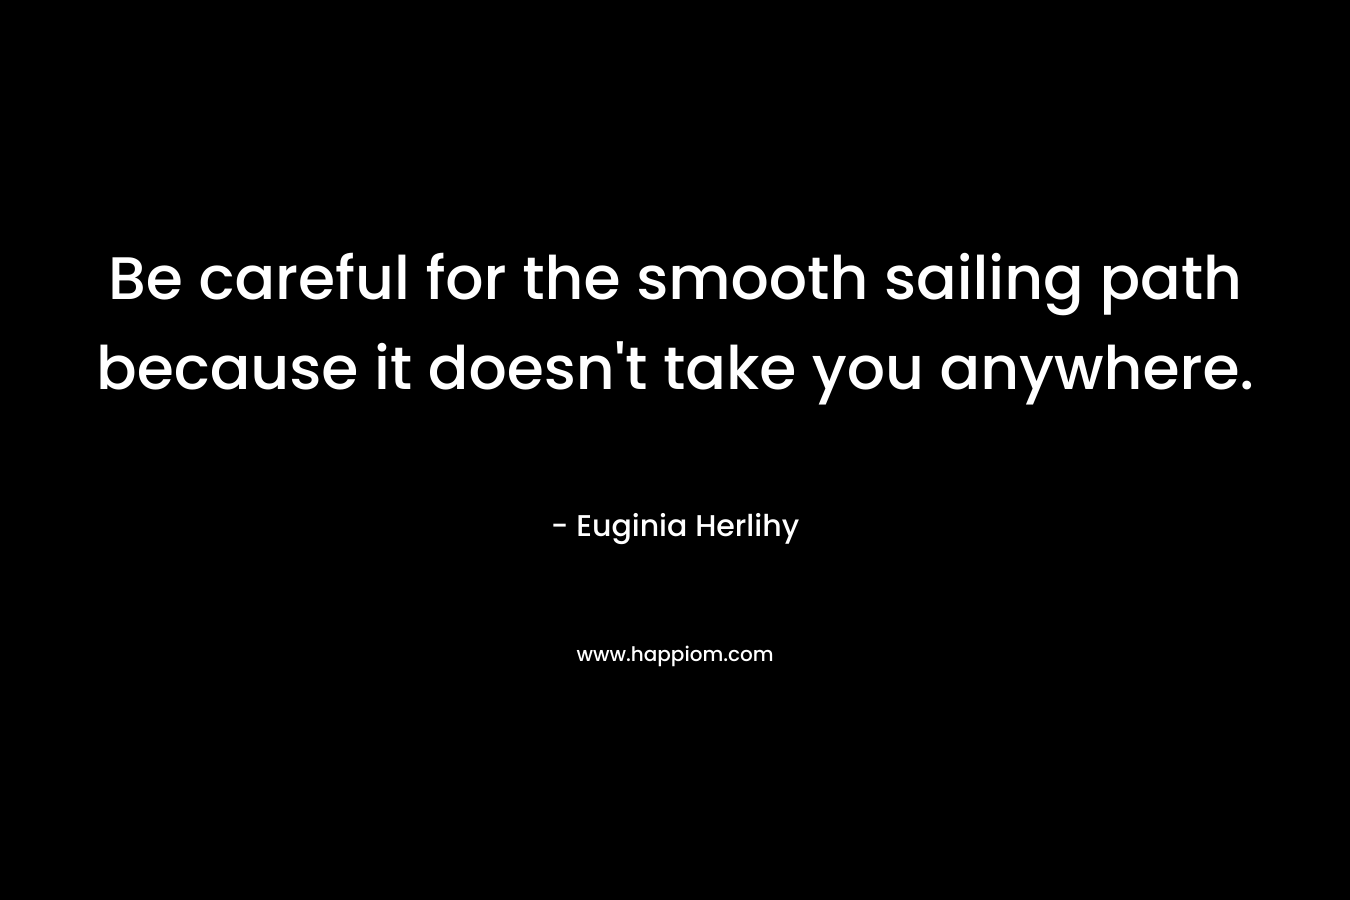 Be careful for the smooth sailing path because it doesn't take you anywhere.